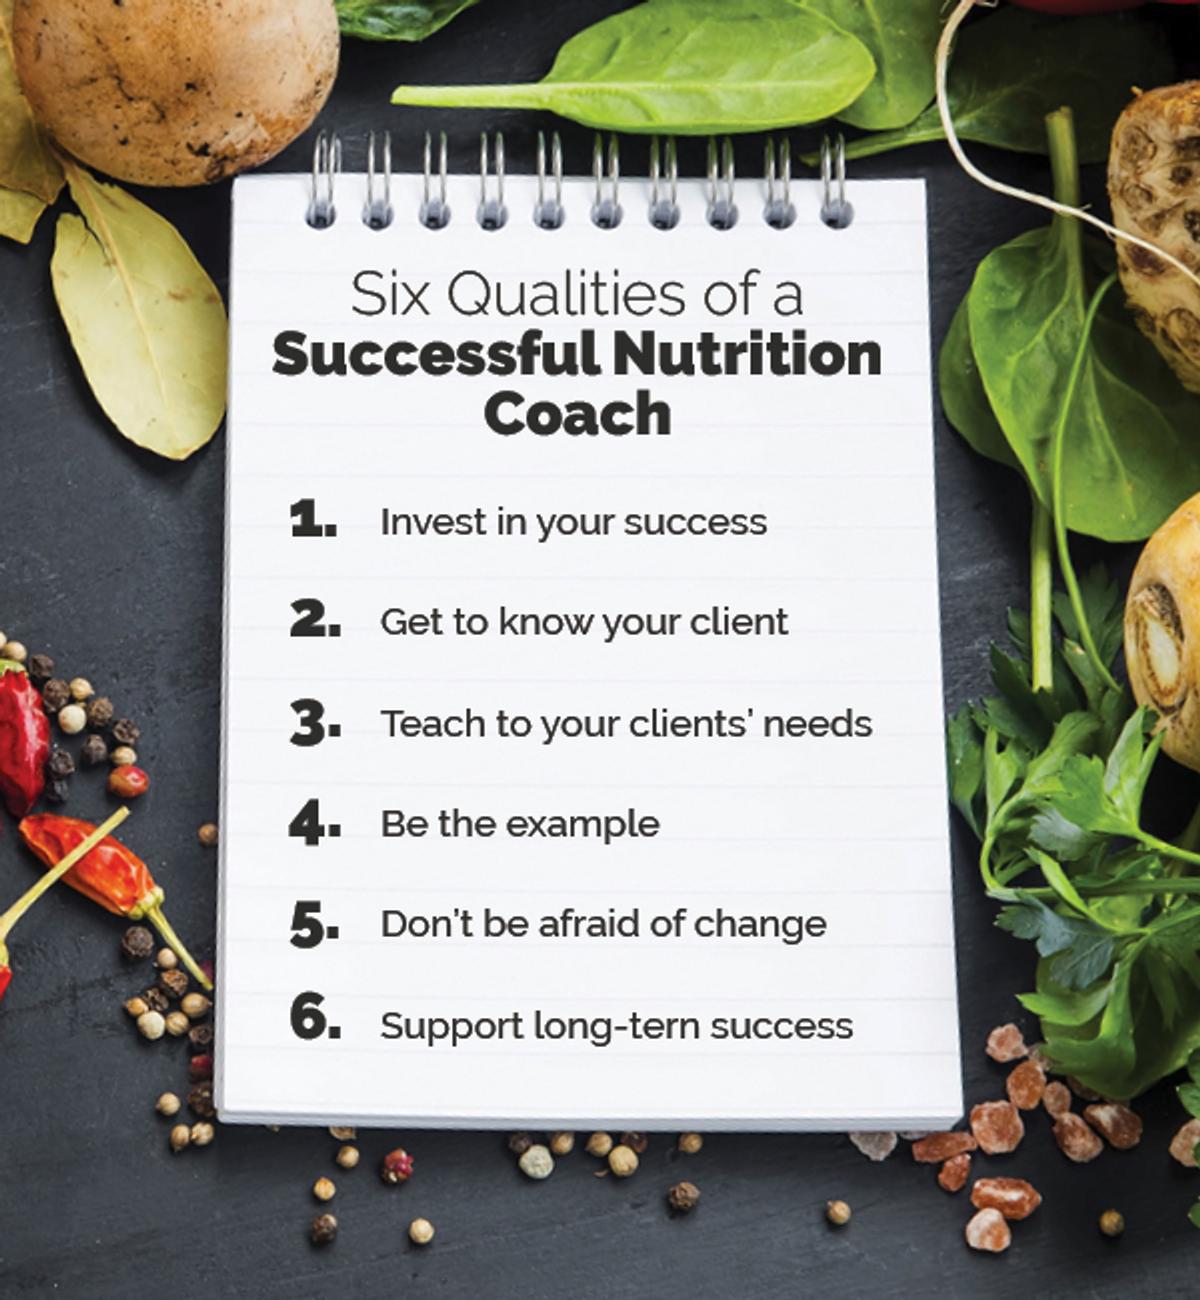 ISSA, International Sports Sciences Association, Certified Personal Trainer, ISSAonline, Nutrition, The Qualities Found in a Good Nutrition Coach, Nutrition Coach Tips